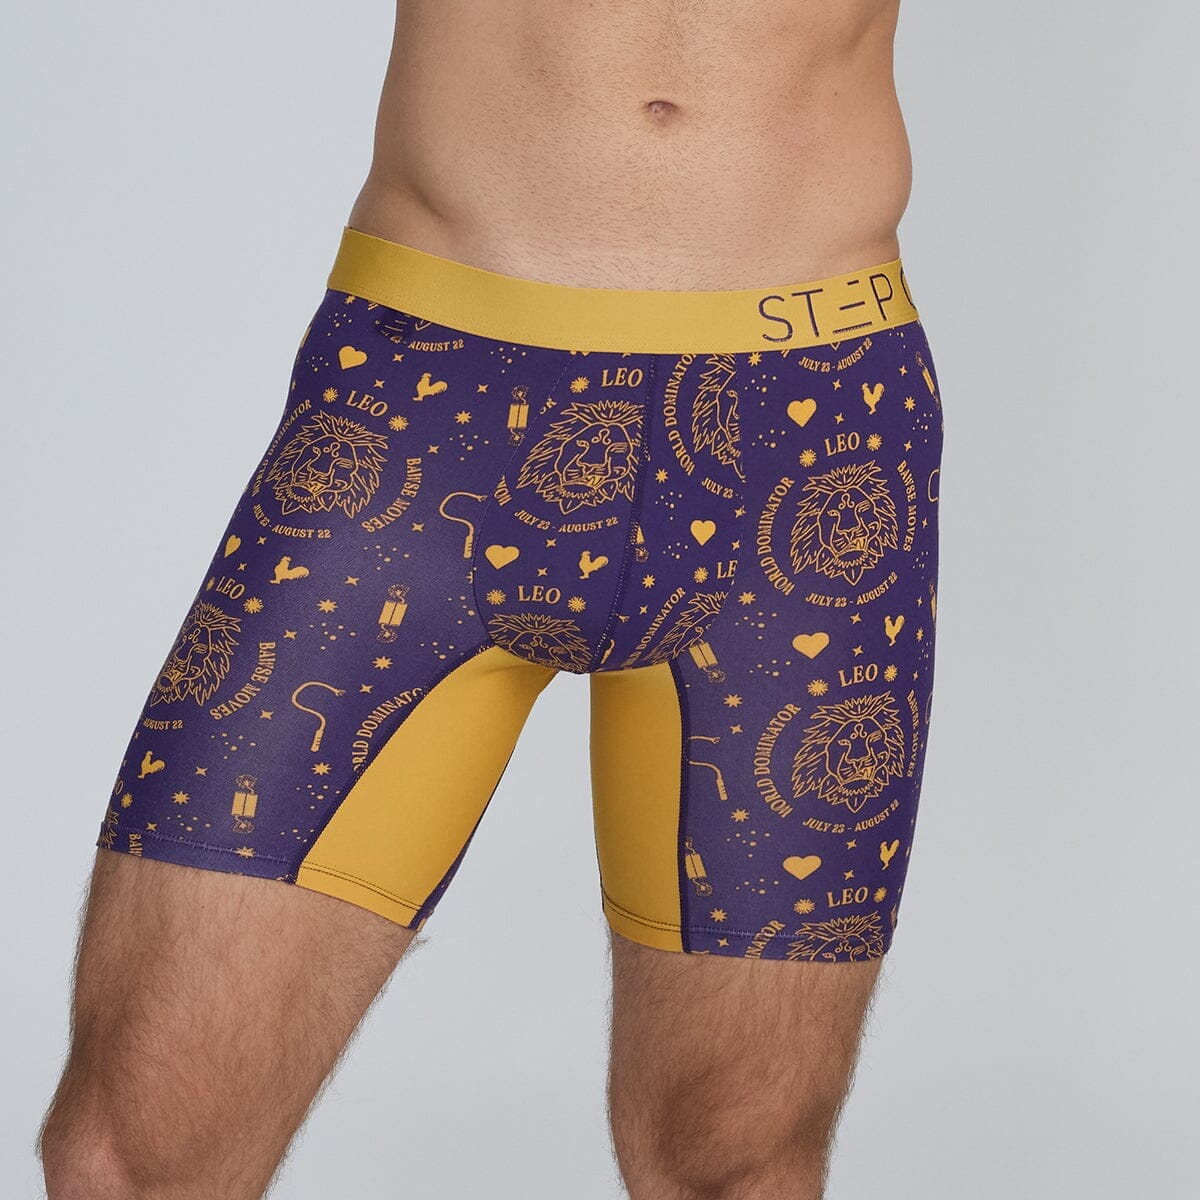 Bamboo Star Sign Underwear at Step One